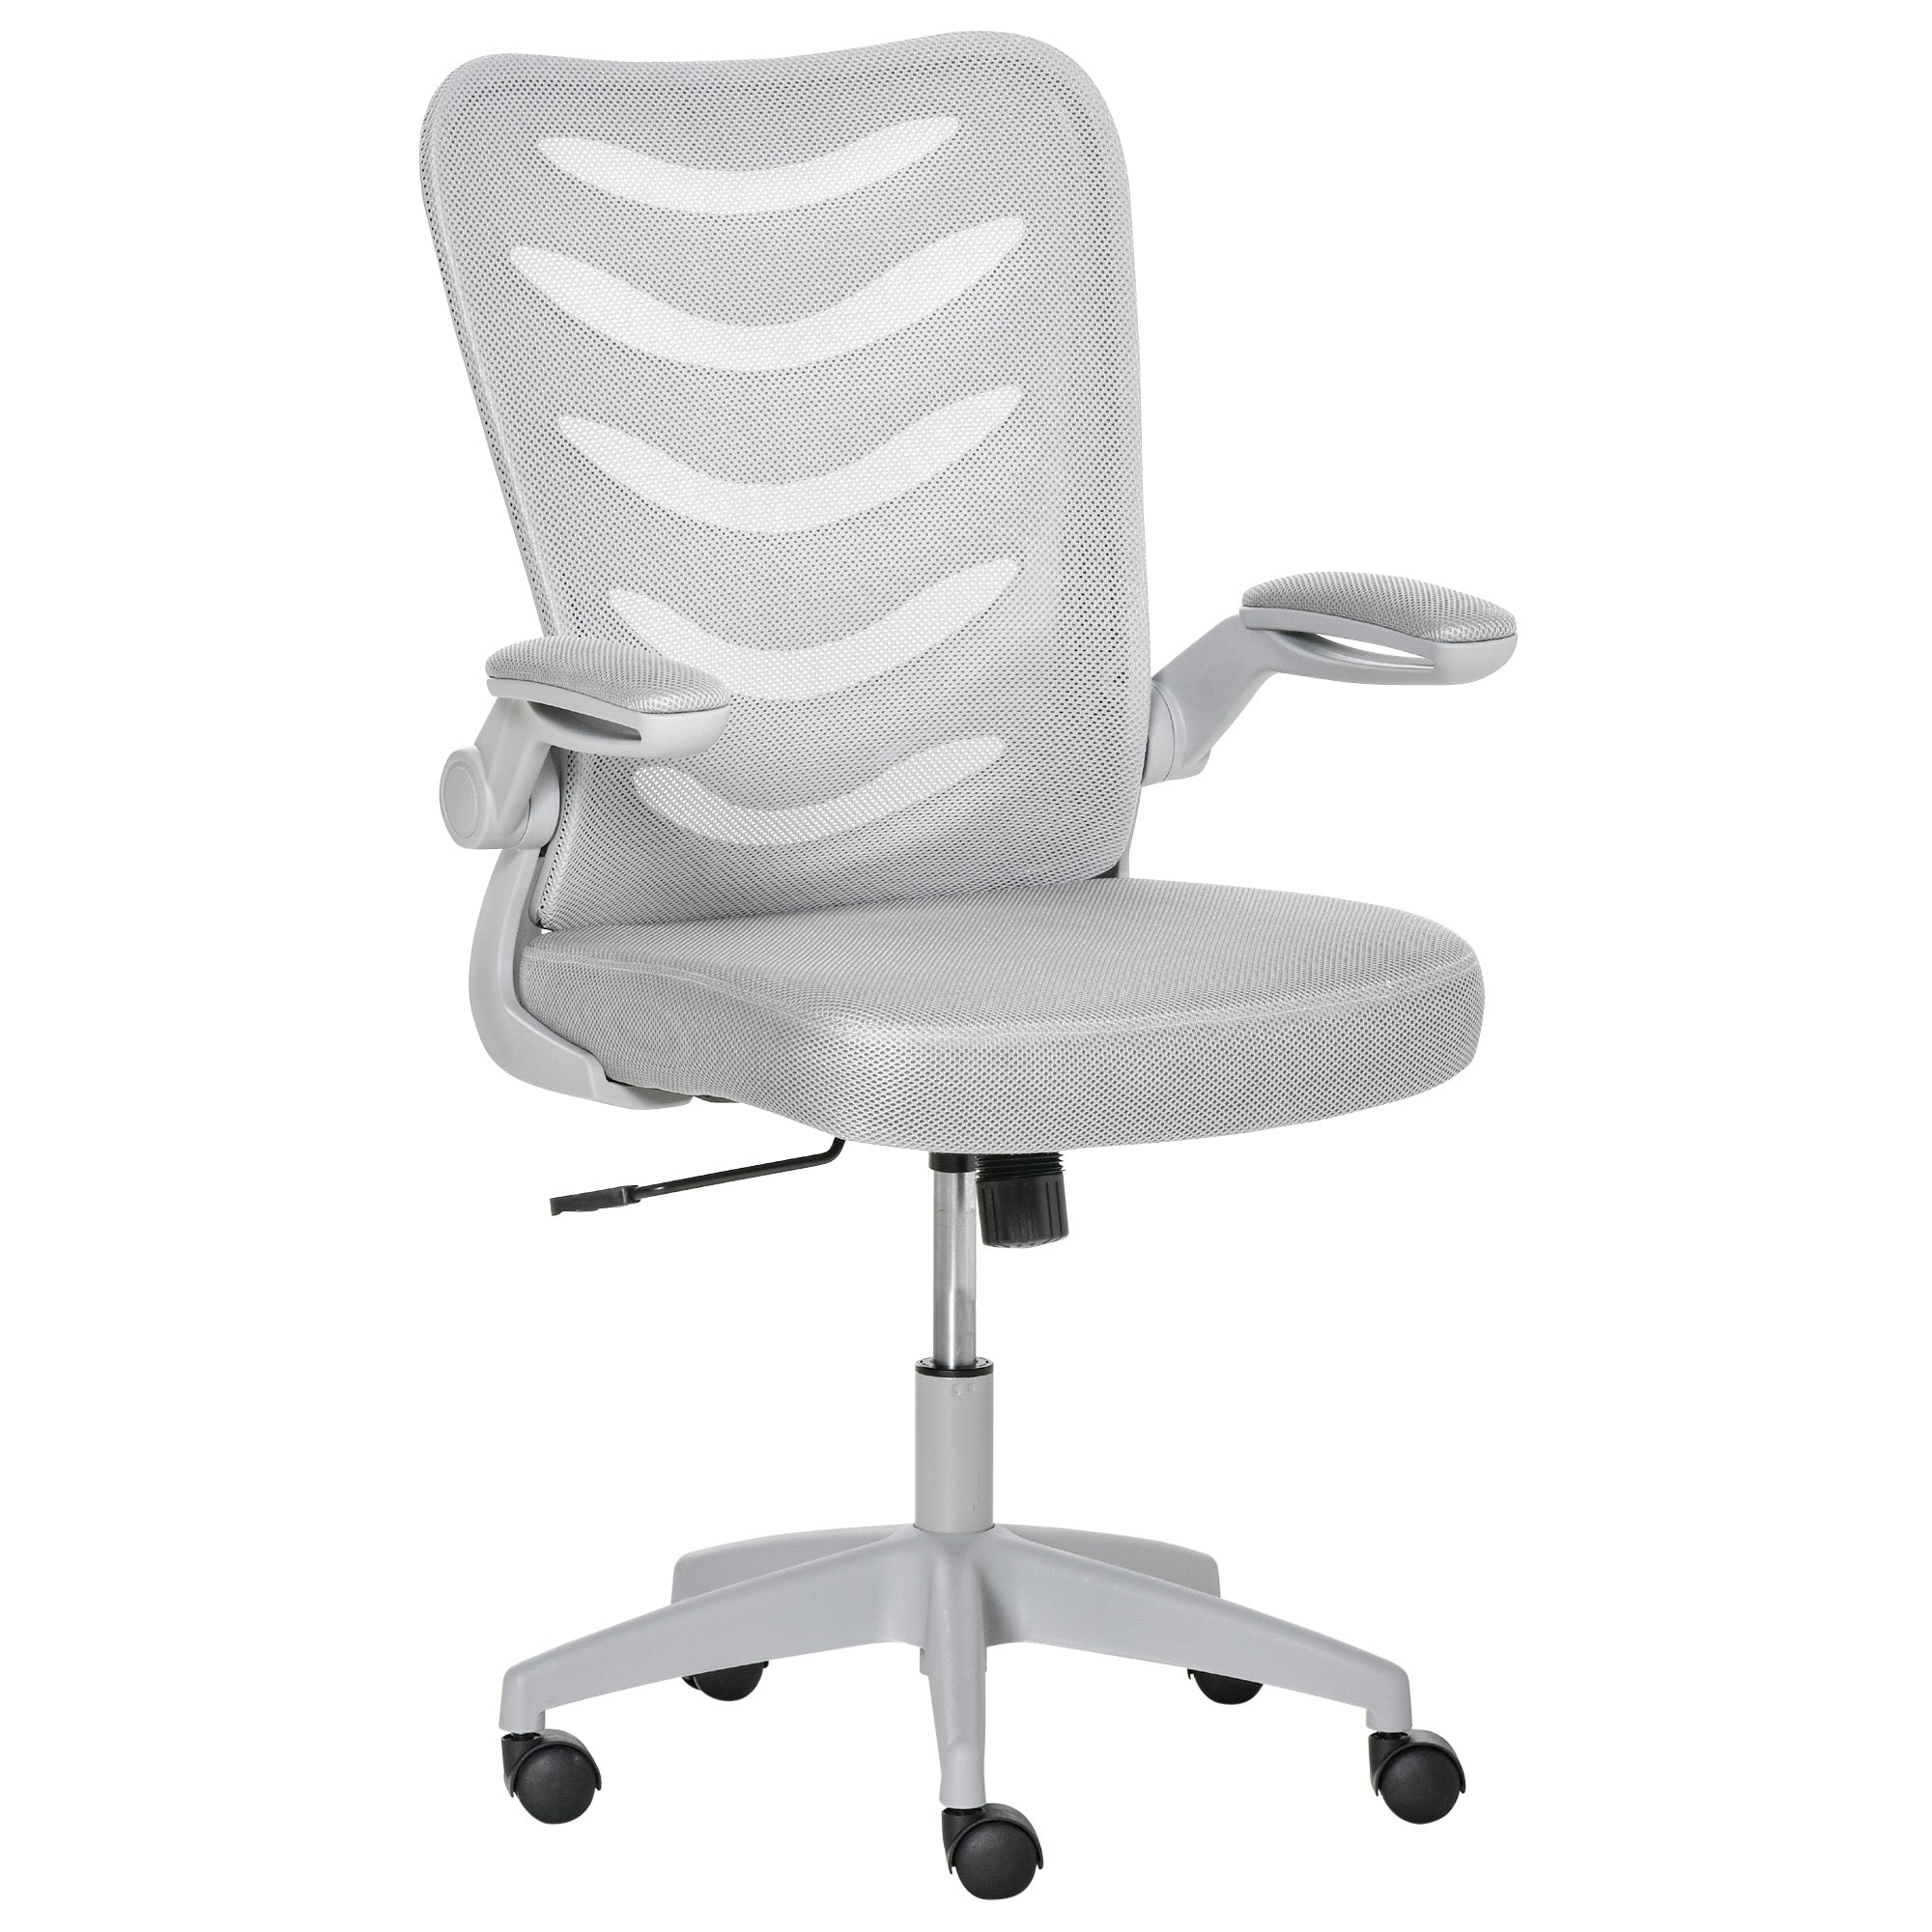 Vinsetto Mesh Office Chair for Home Swivel Task Desk Chair with Lumbar Back Support Flip-Up Arm Adjustable Height Grey Computer w/ - TJ Hughes